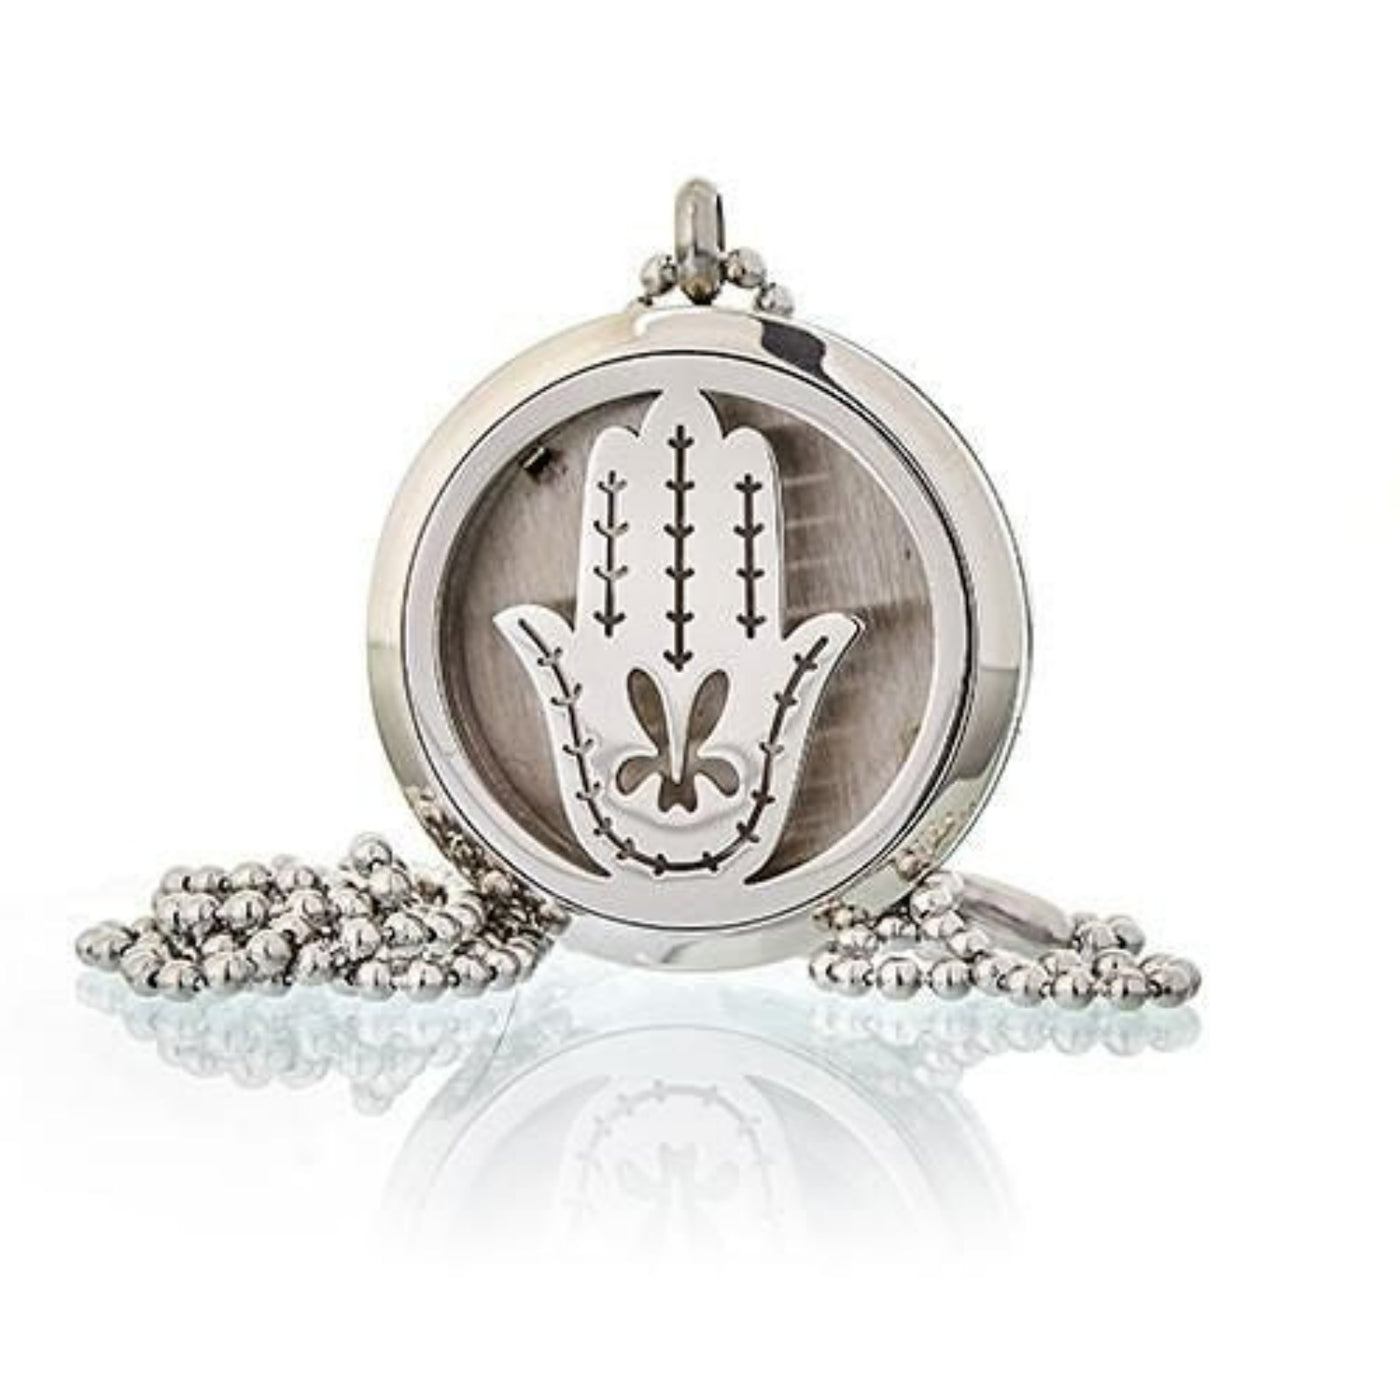 Aromatherapy Diffuser Necklace - Hand of Fatima 30mm.